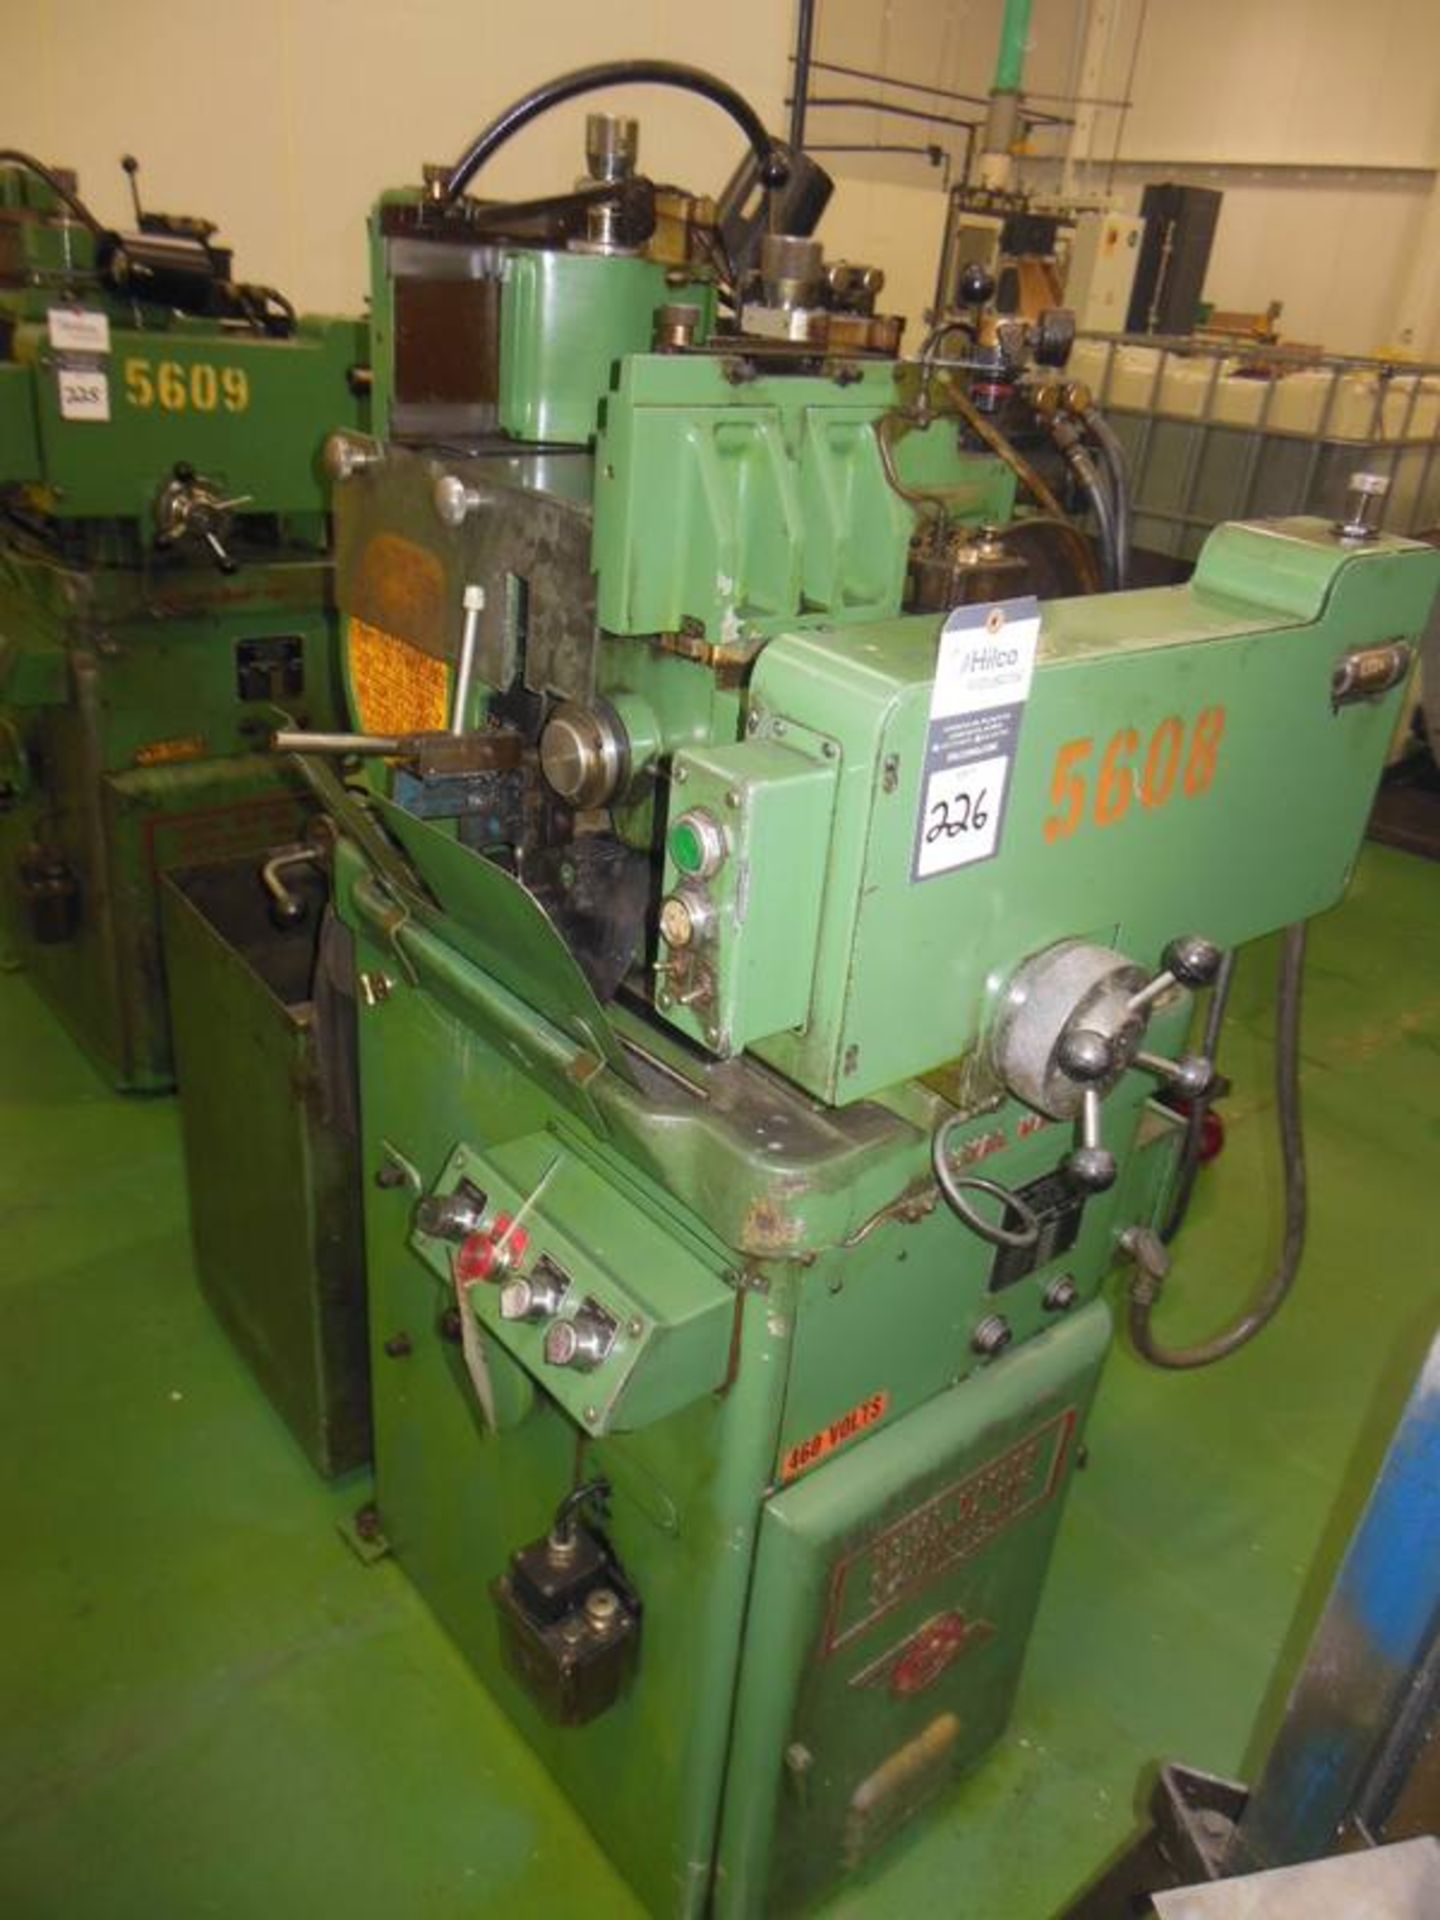 Royal Master Model TG12X4 12" x 4"  Centerless Grinder; Serial Number: 2150; with Infeed & Through